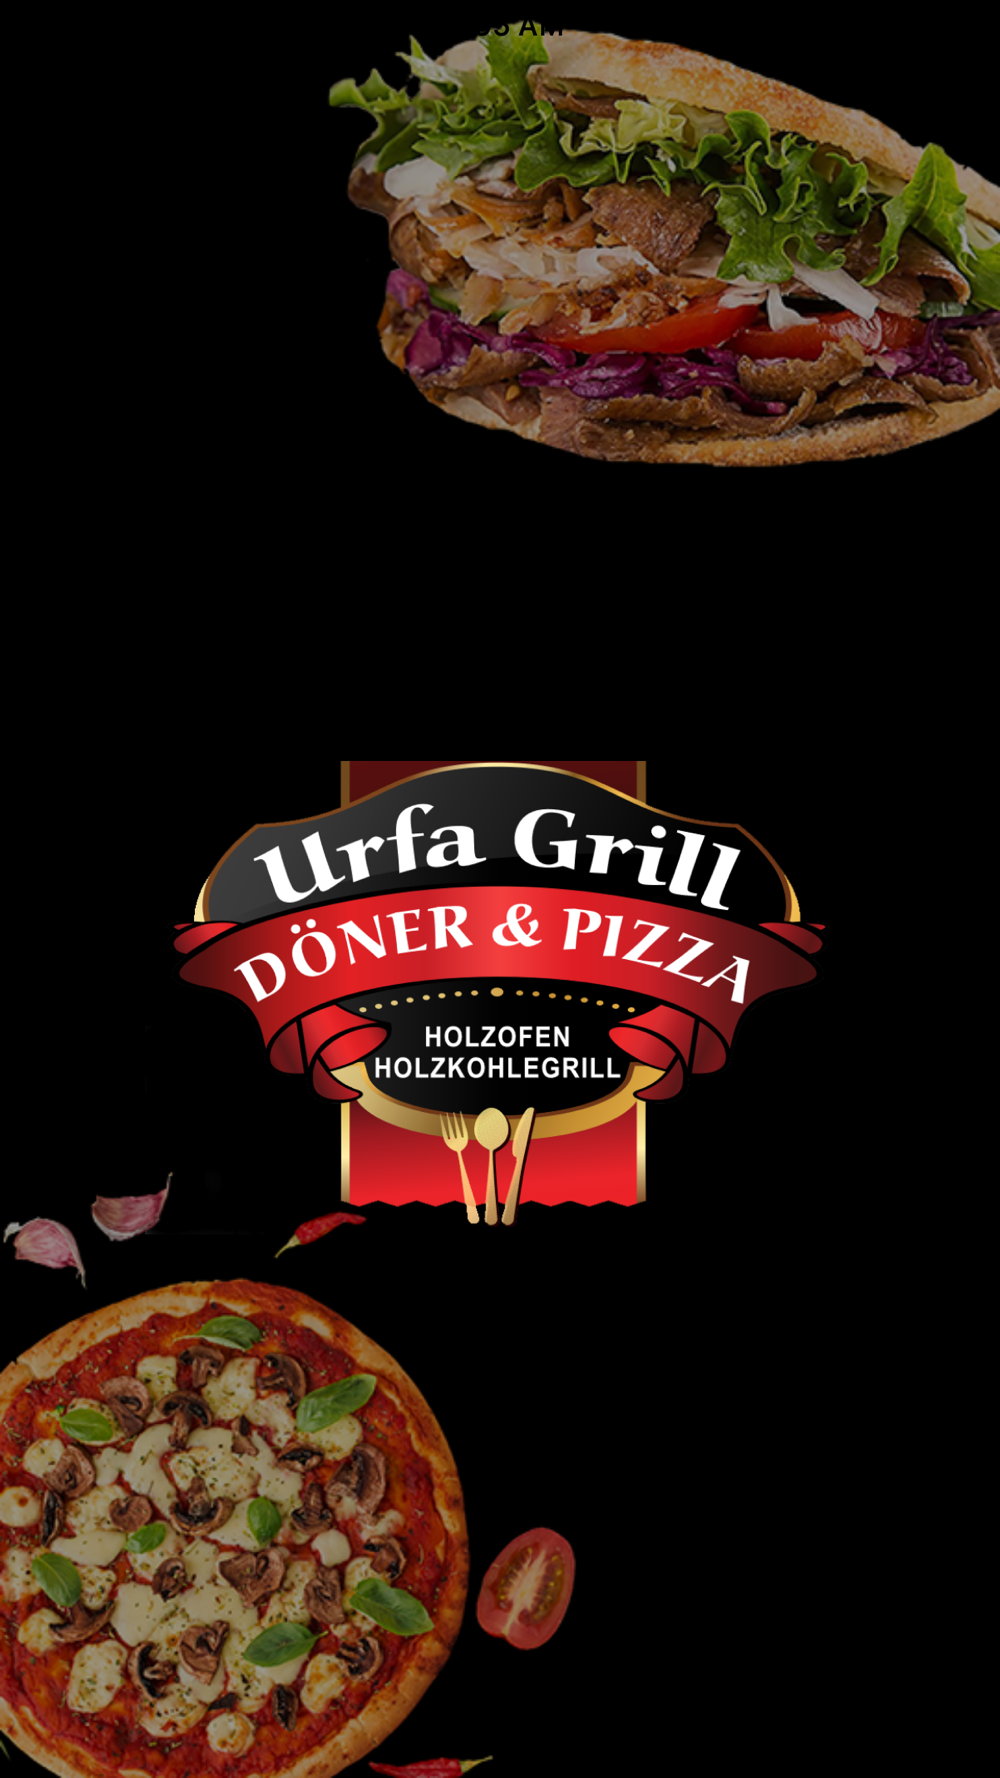 Urfa Grill Hofheim Free Download App for iPhone - STEPrimo.com